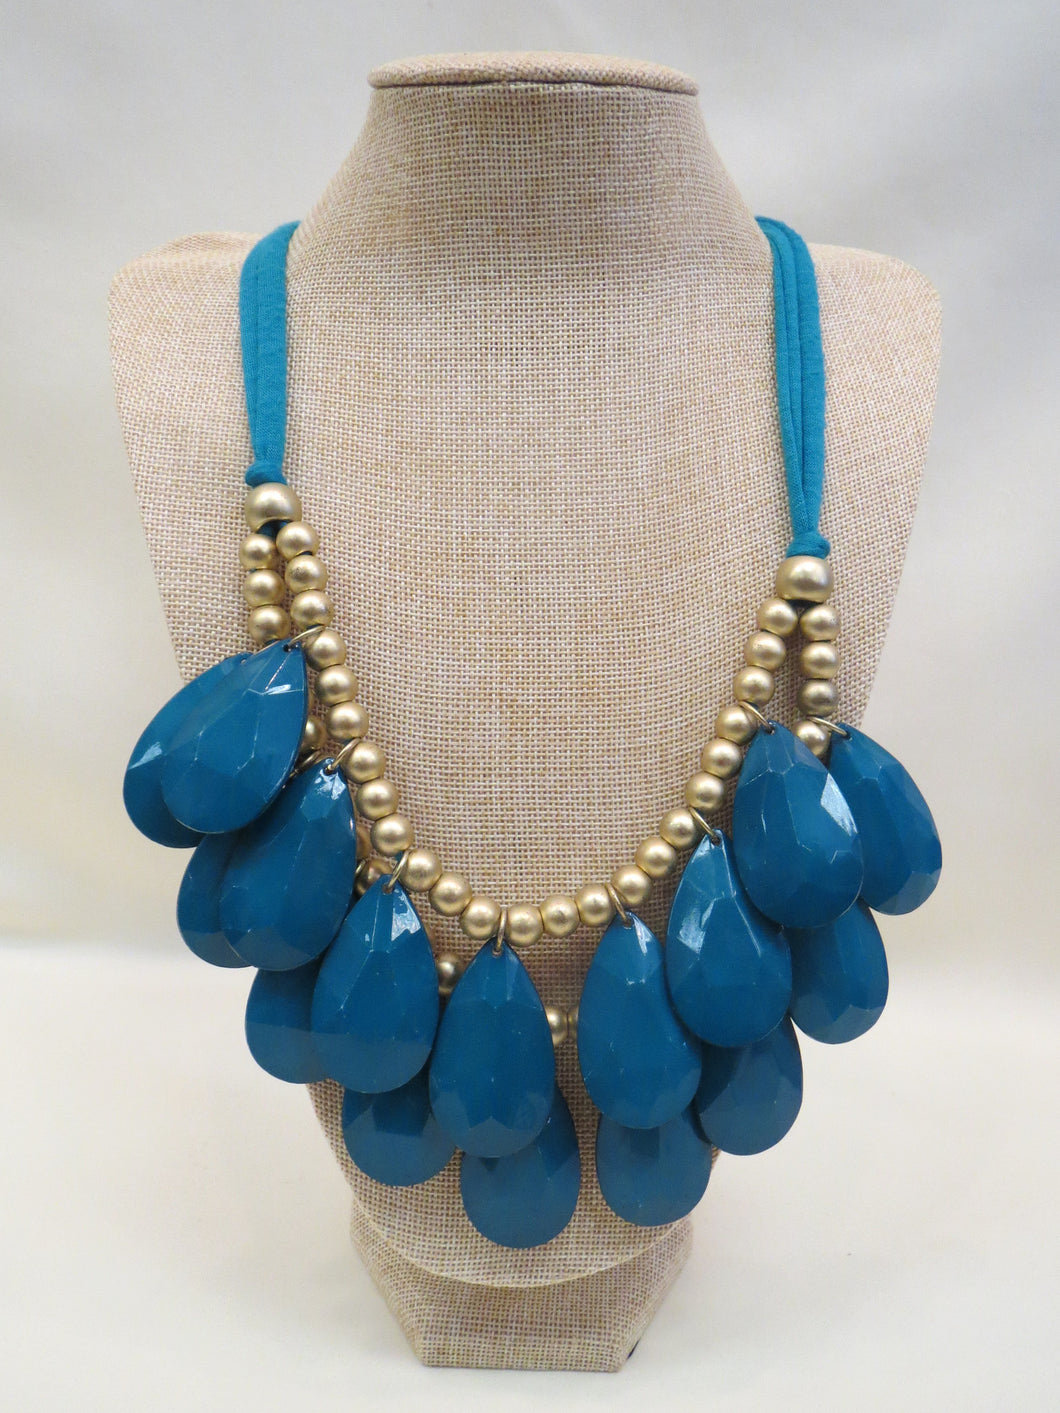 ADO | Cloth Necklace Teal & Gold Beads - All Decd Out